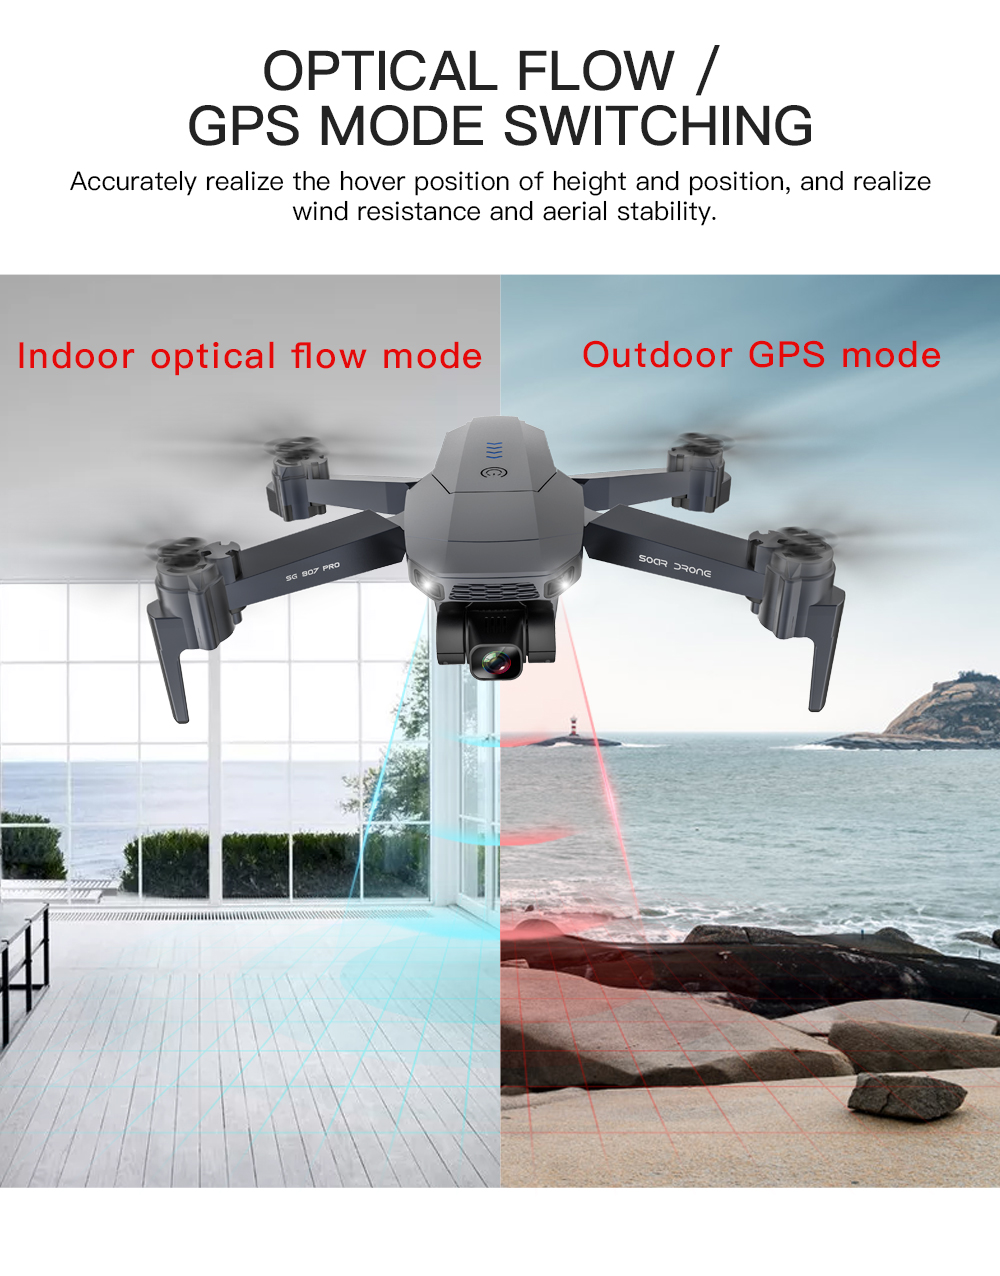 ZLL SG907 Pro 5G WIFI FPV GPS With 4K HD Dual Camera Two-axis Gimbal Optical Flow Positioning Foldable RC Drone Quadcopter RTF 38